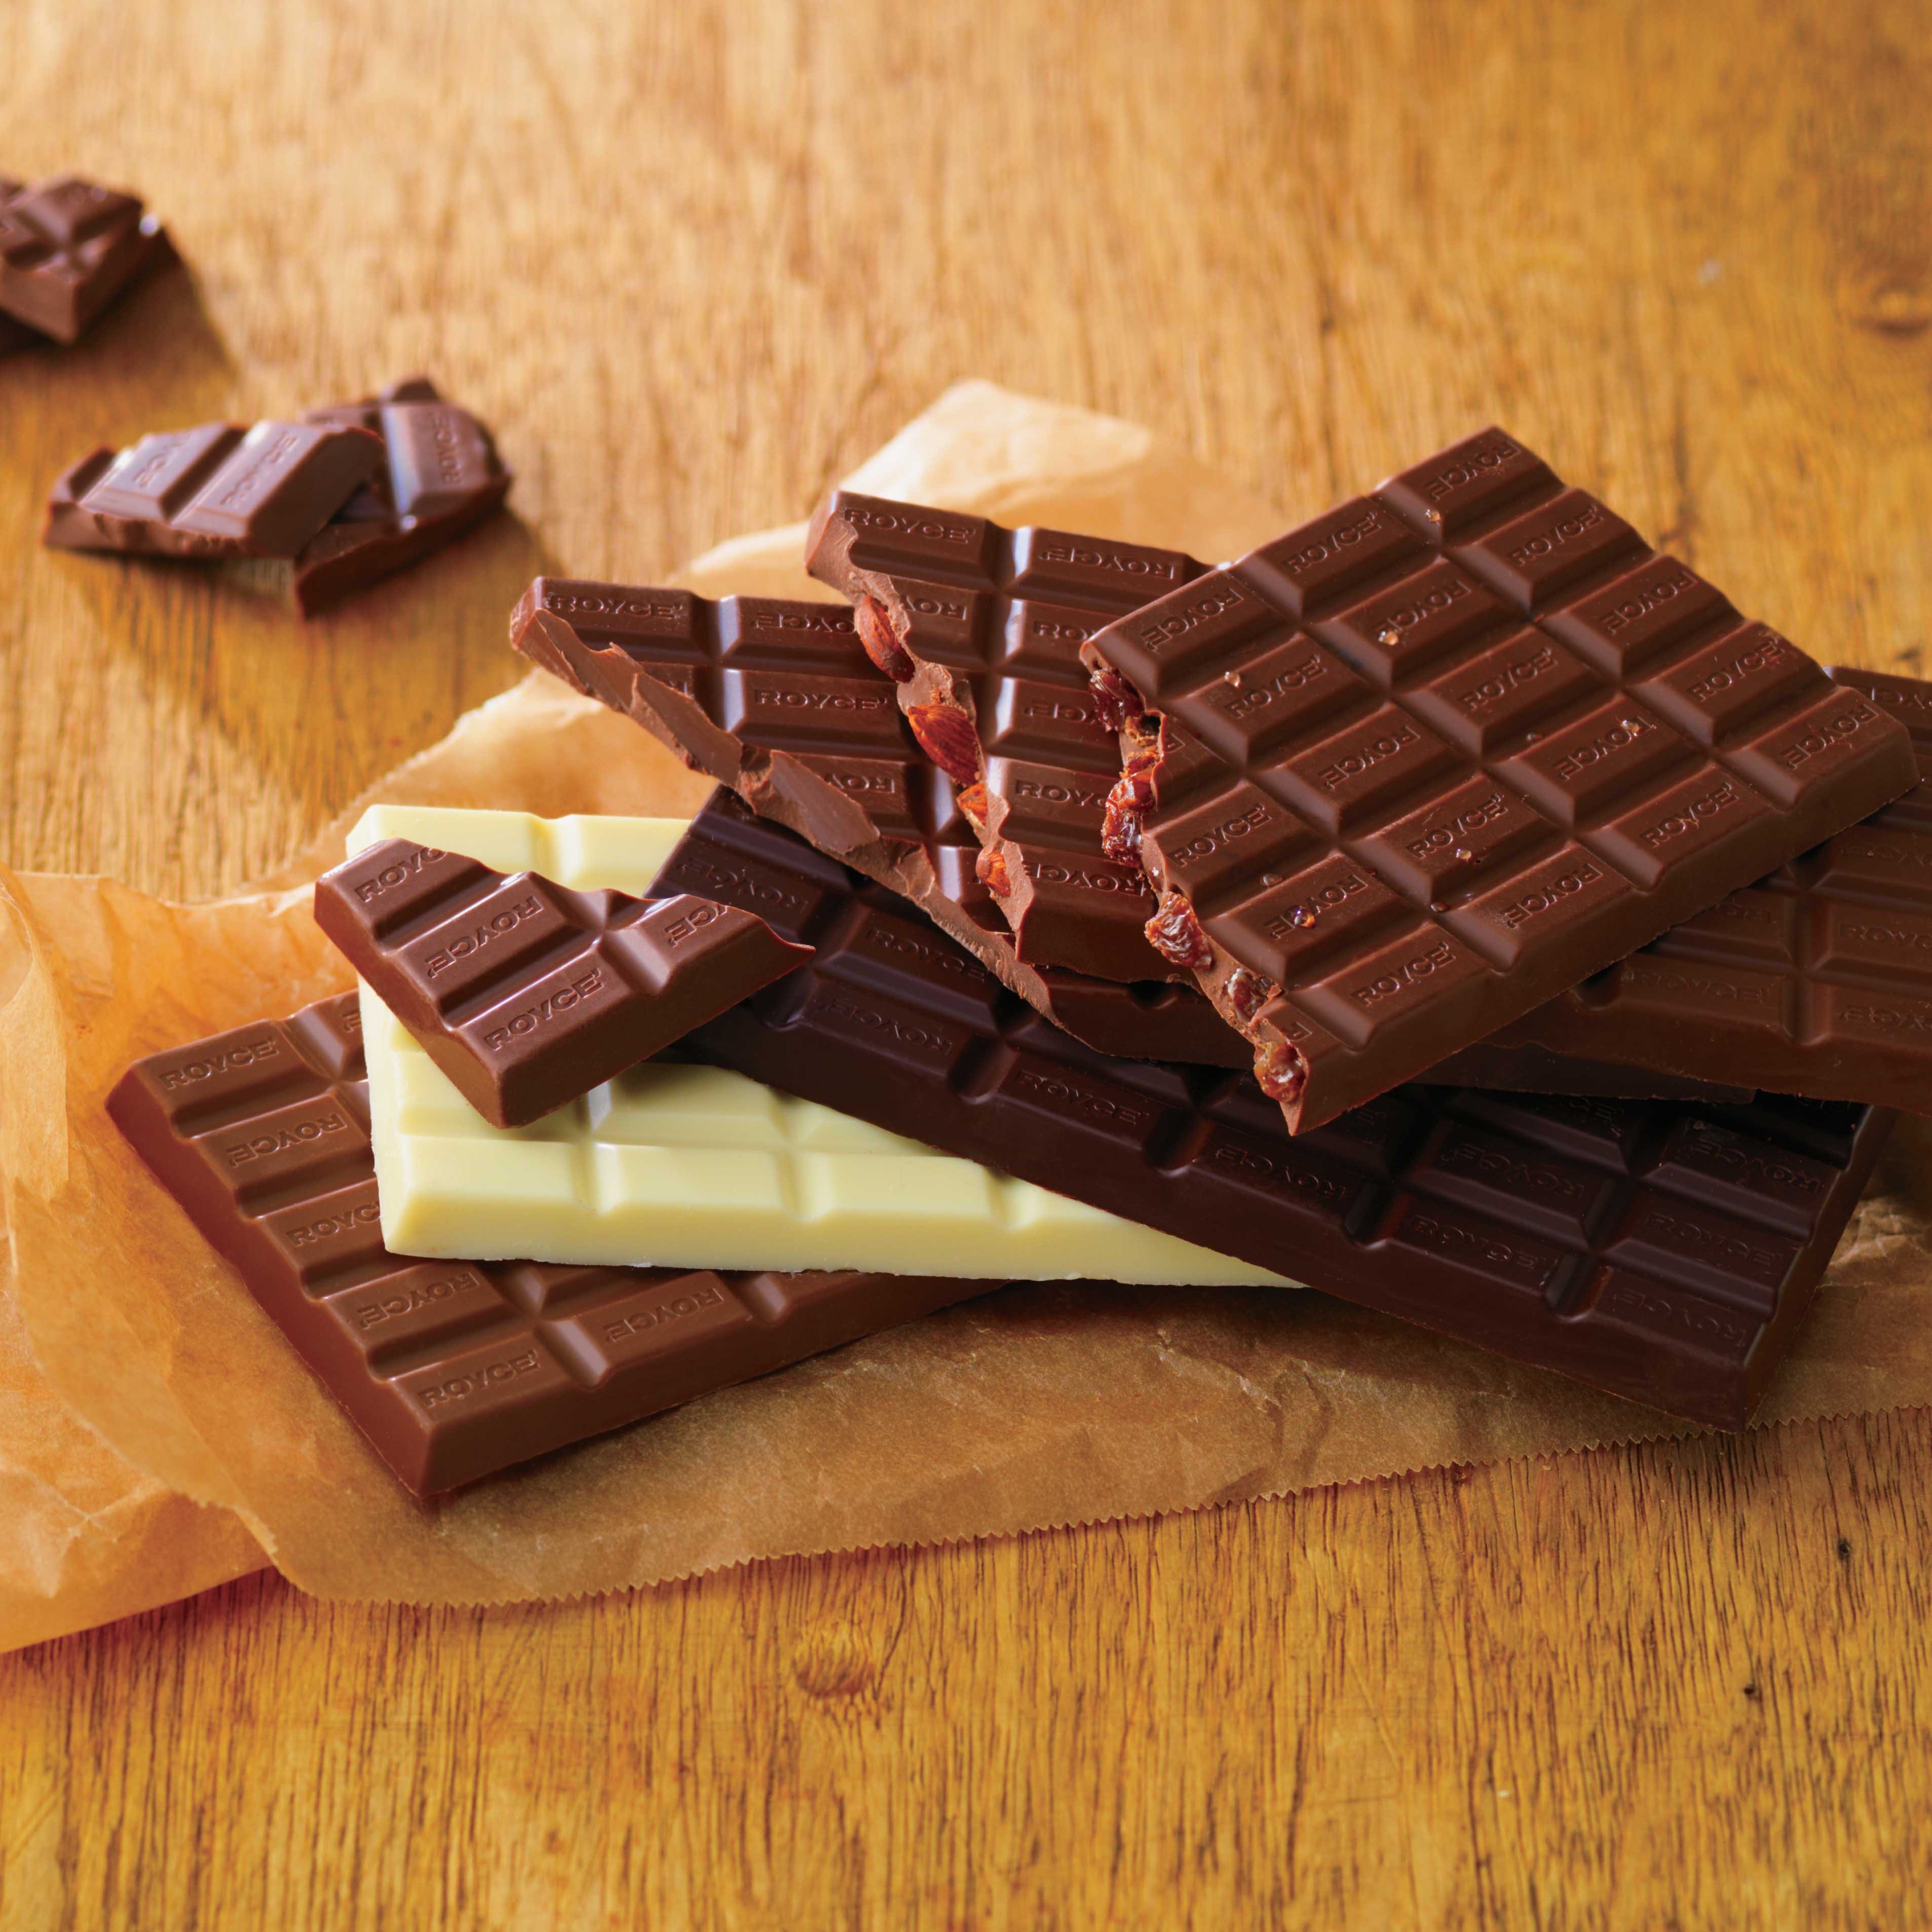 Image shows a stack of chocolate bars.